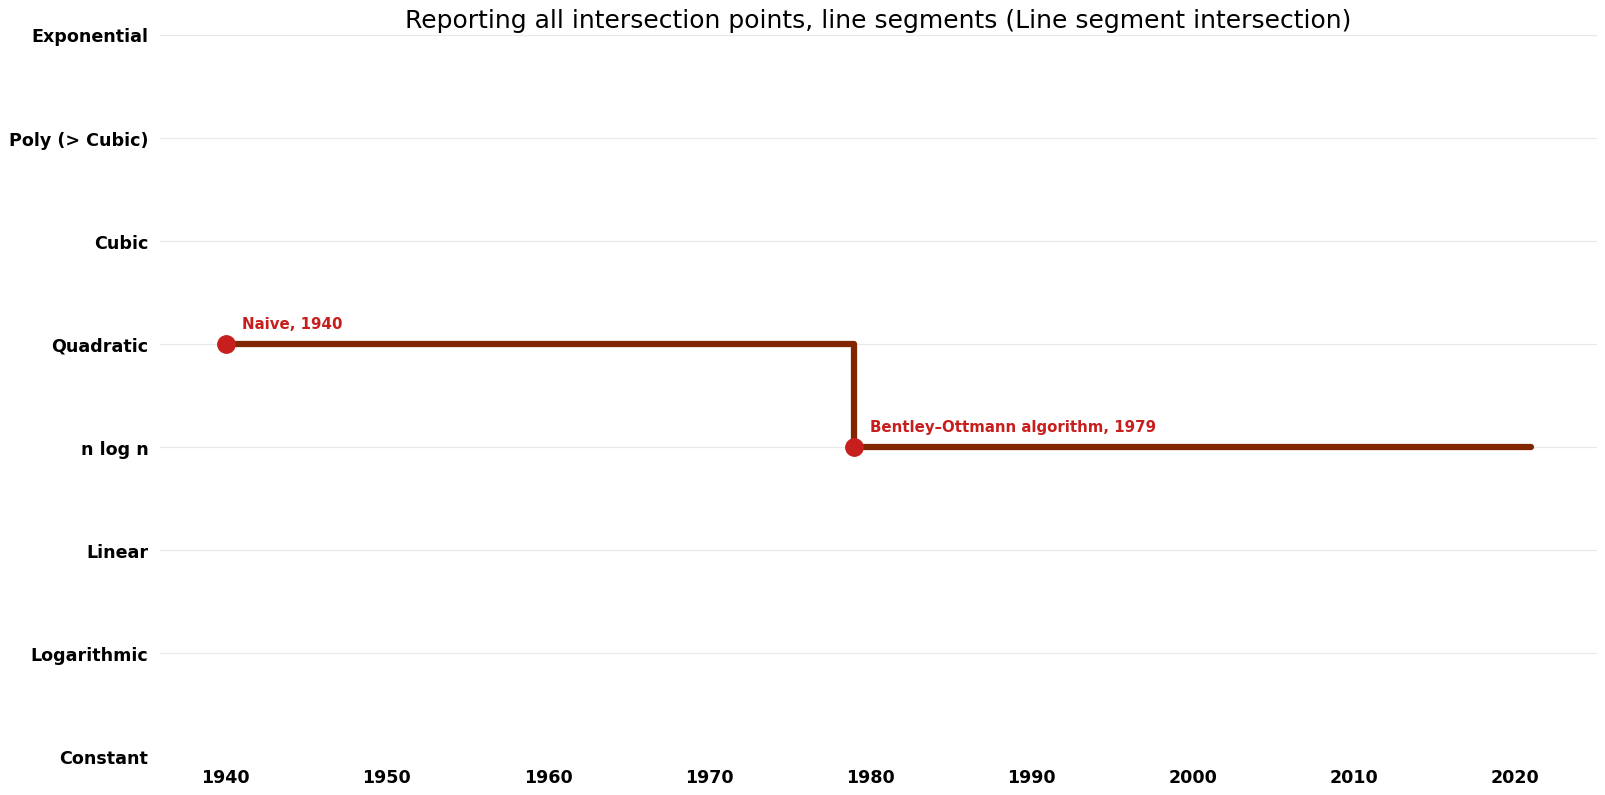 Line segment intersection - Reporting all intersection points, line segments - Time.png